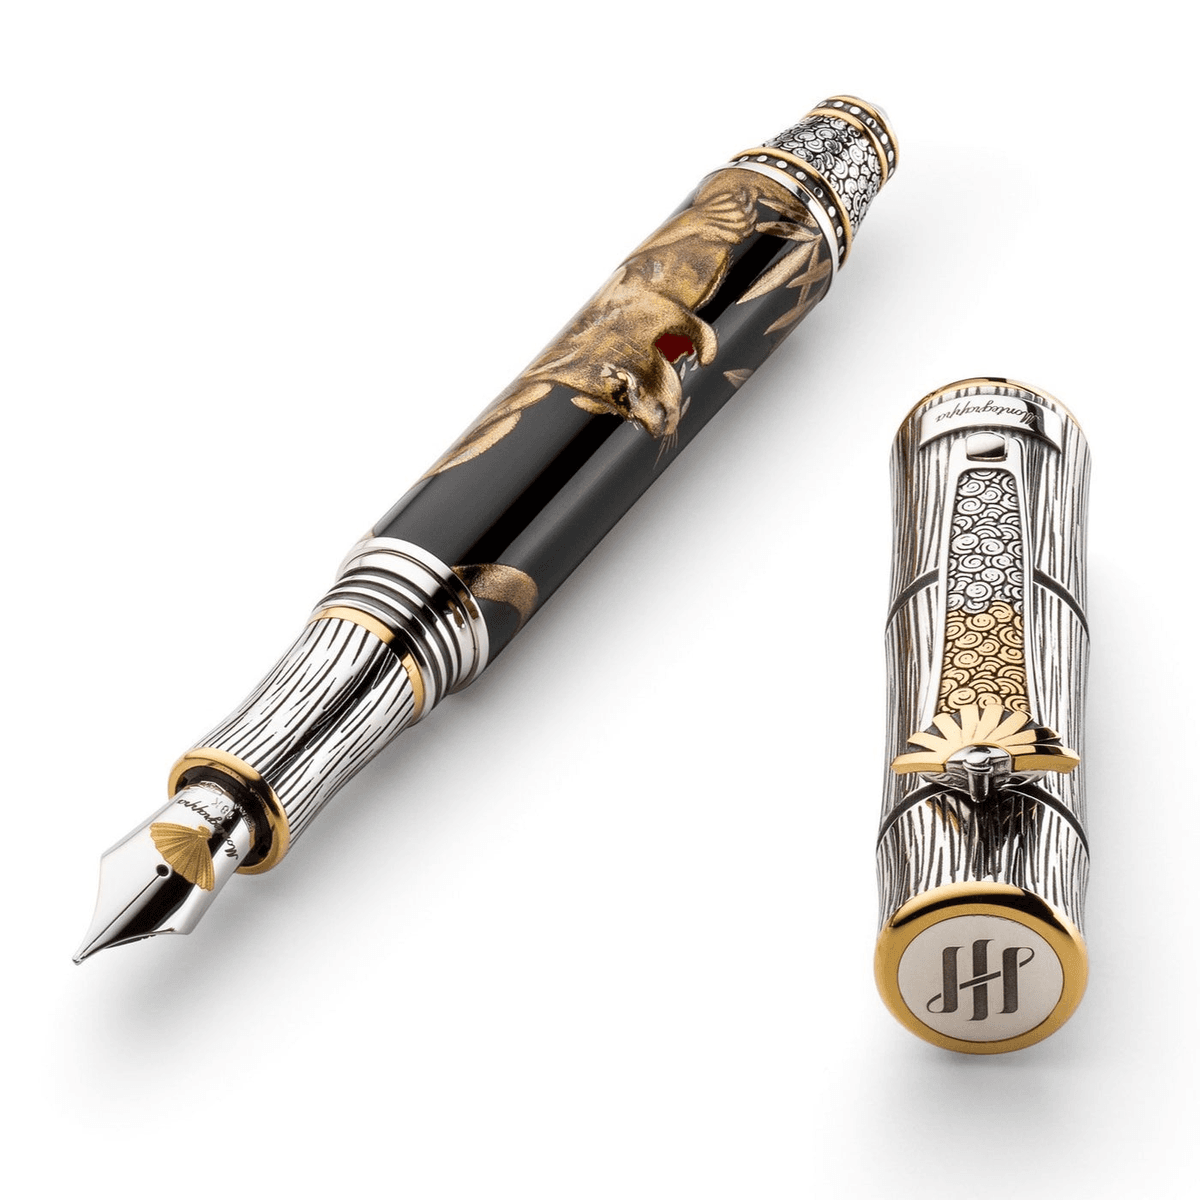 Montegrappa. (Courtesy of retailers)